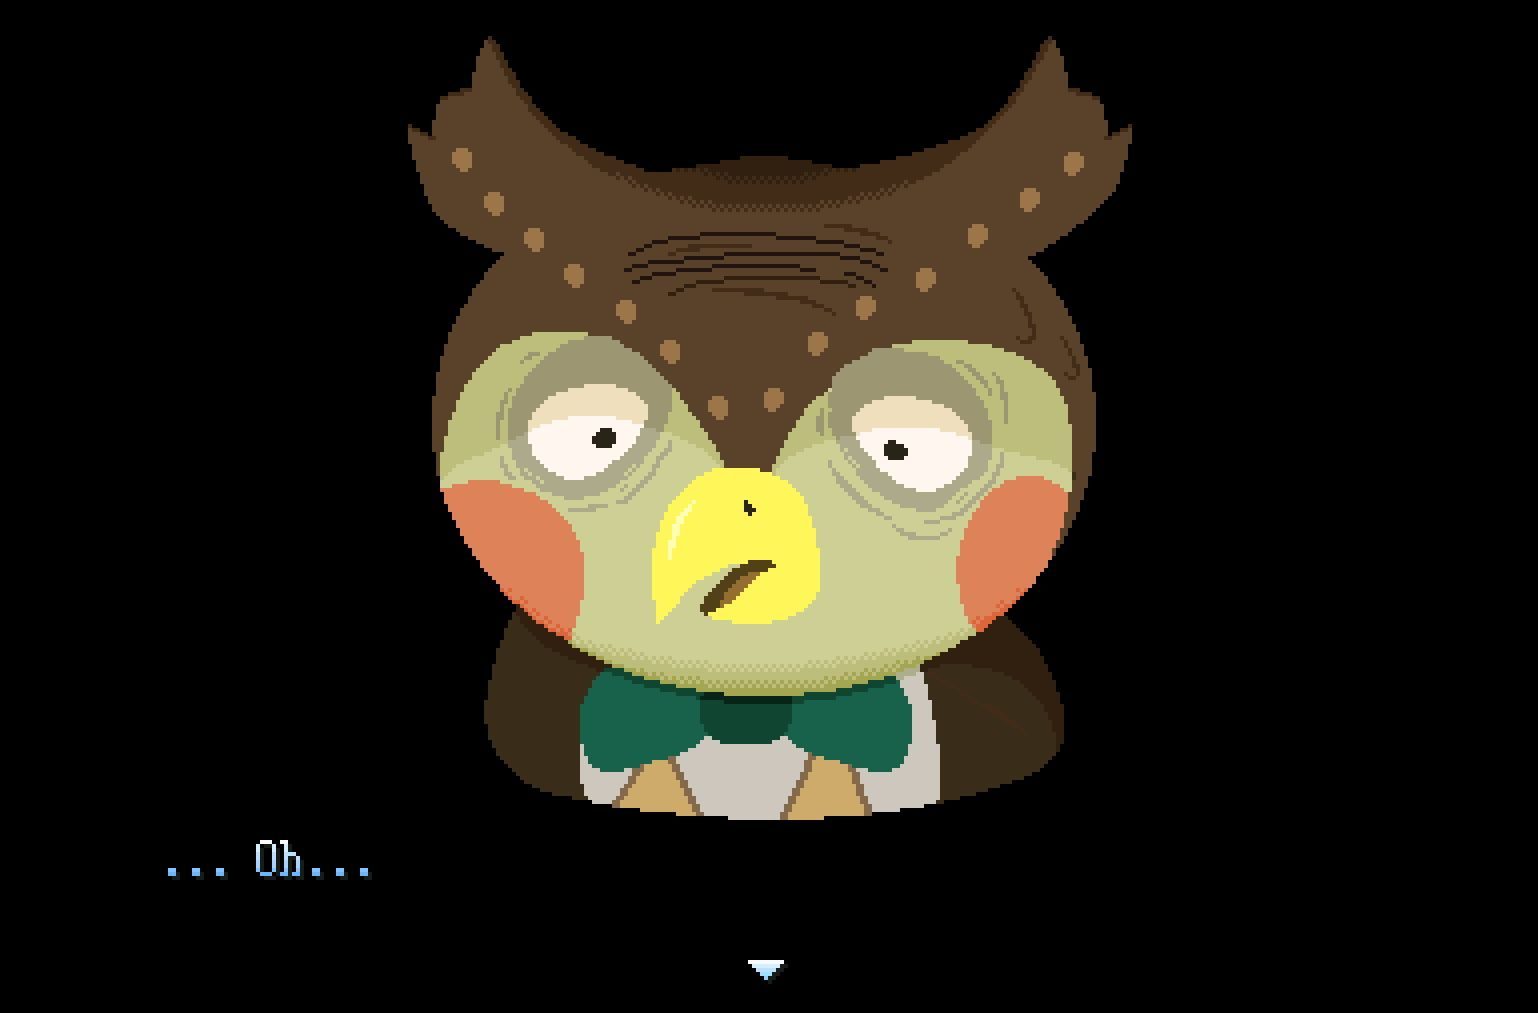 kind-donations-blathers-1463214